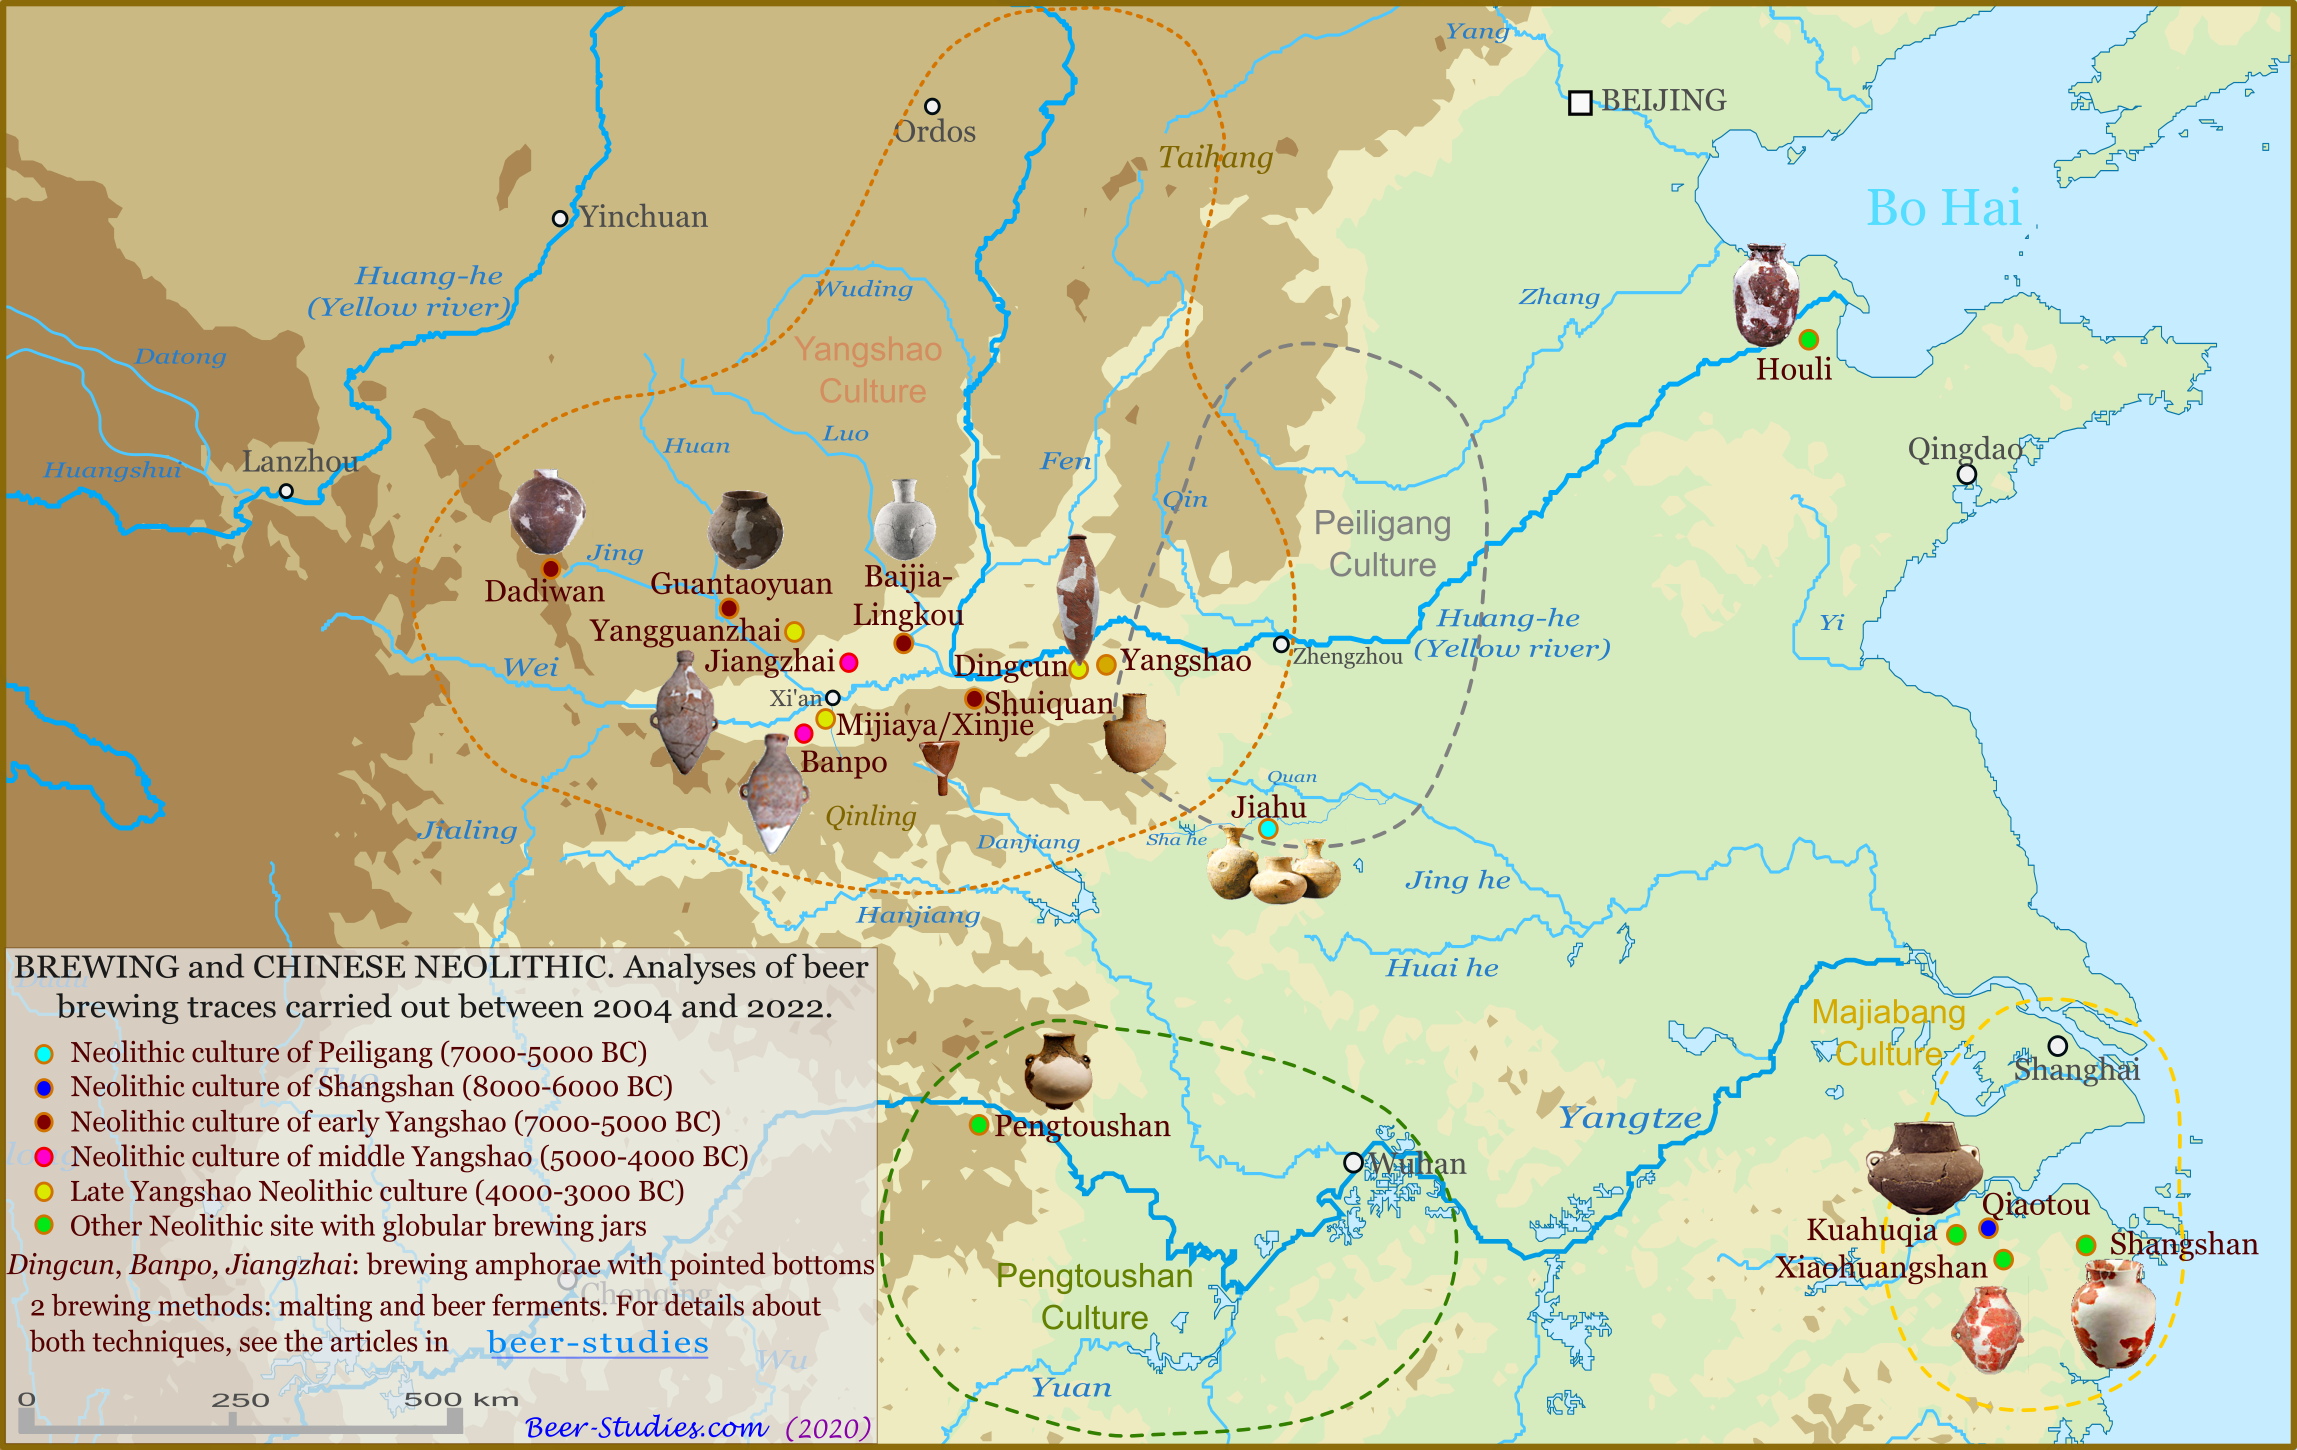 Location of Dingcun and Neolithic sites related to beer brewing in China